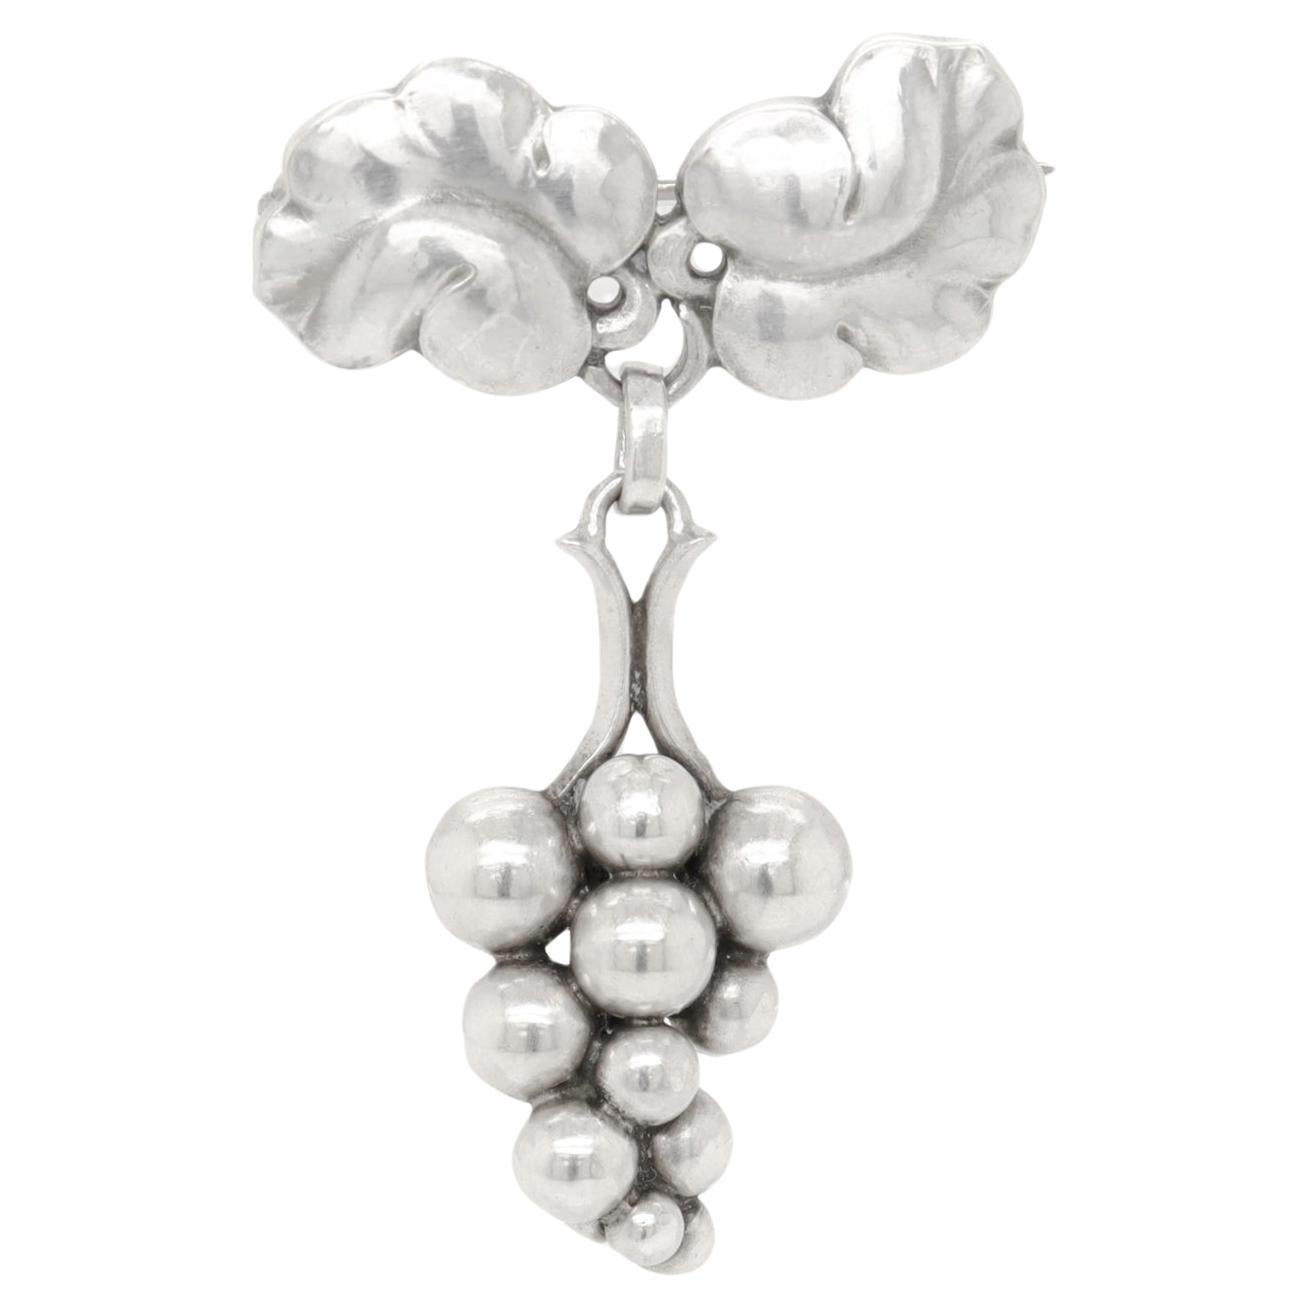 Georg Jensen Sterling Silver "Grapes" Brooch or Pin No. 217A